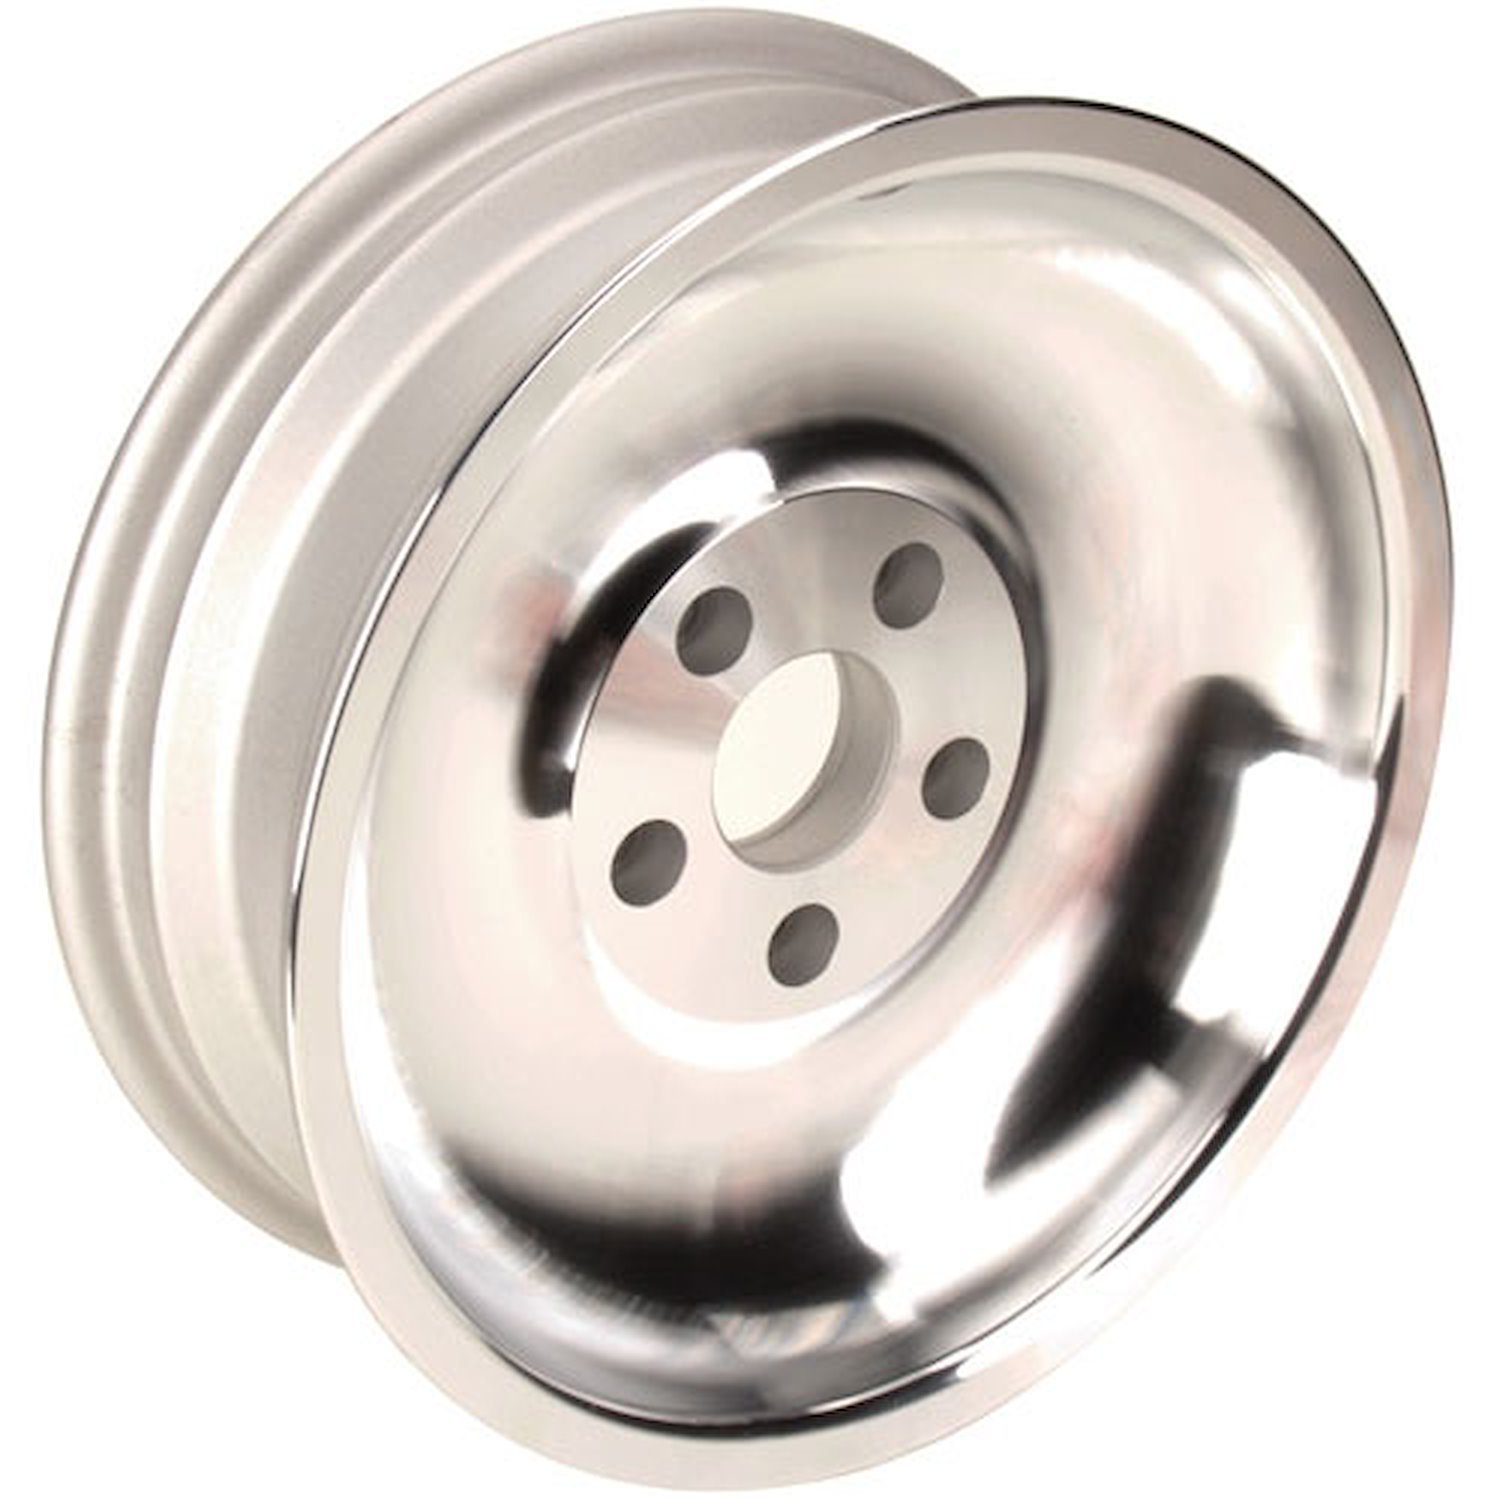 Solid Wheel - Machined Size: 18" x 6"